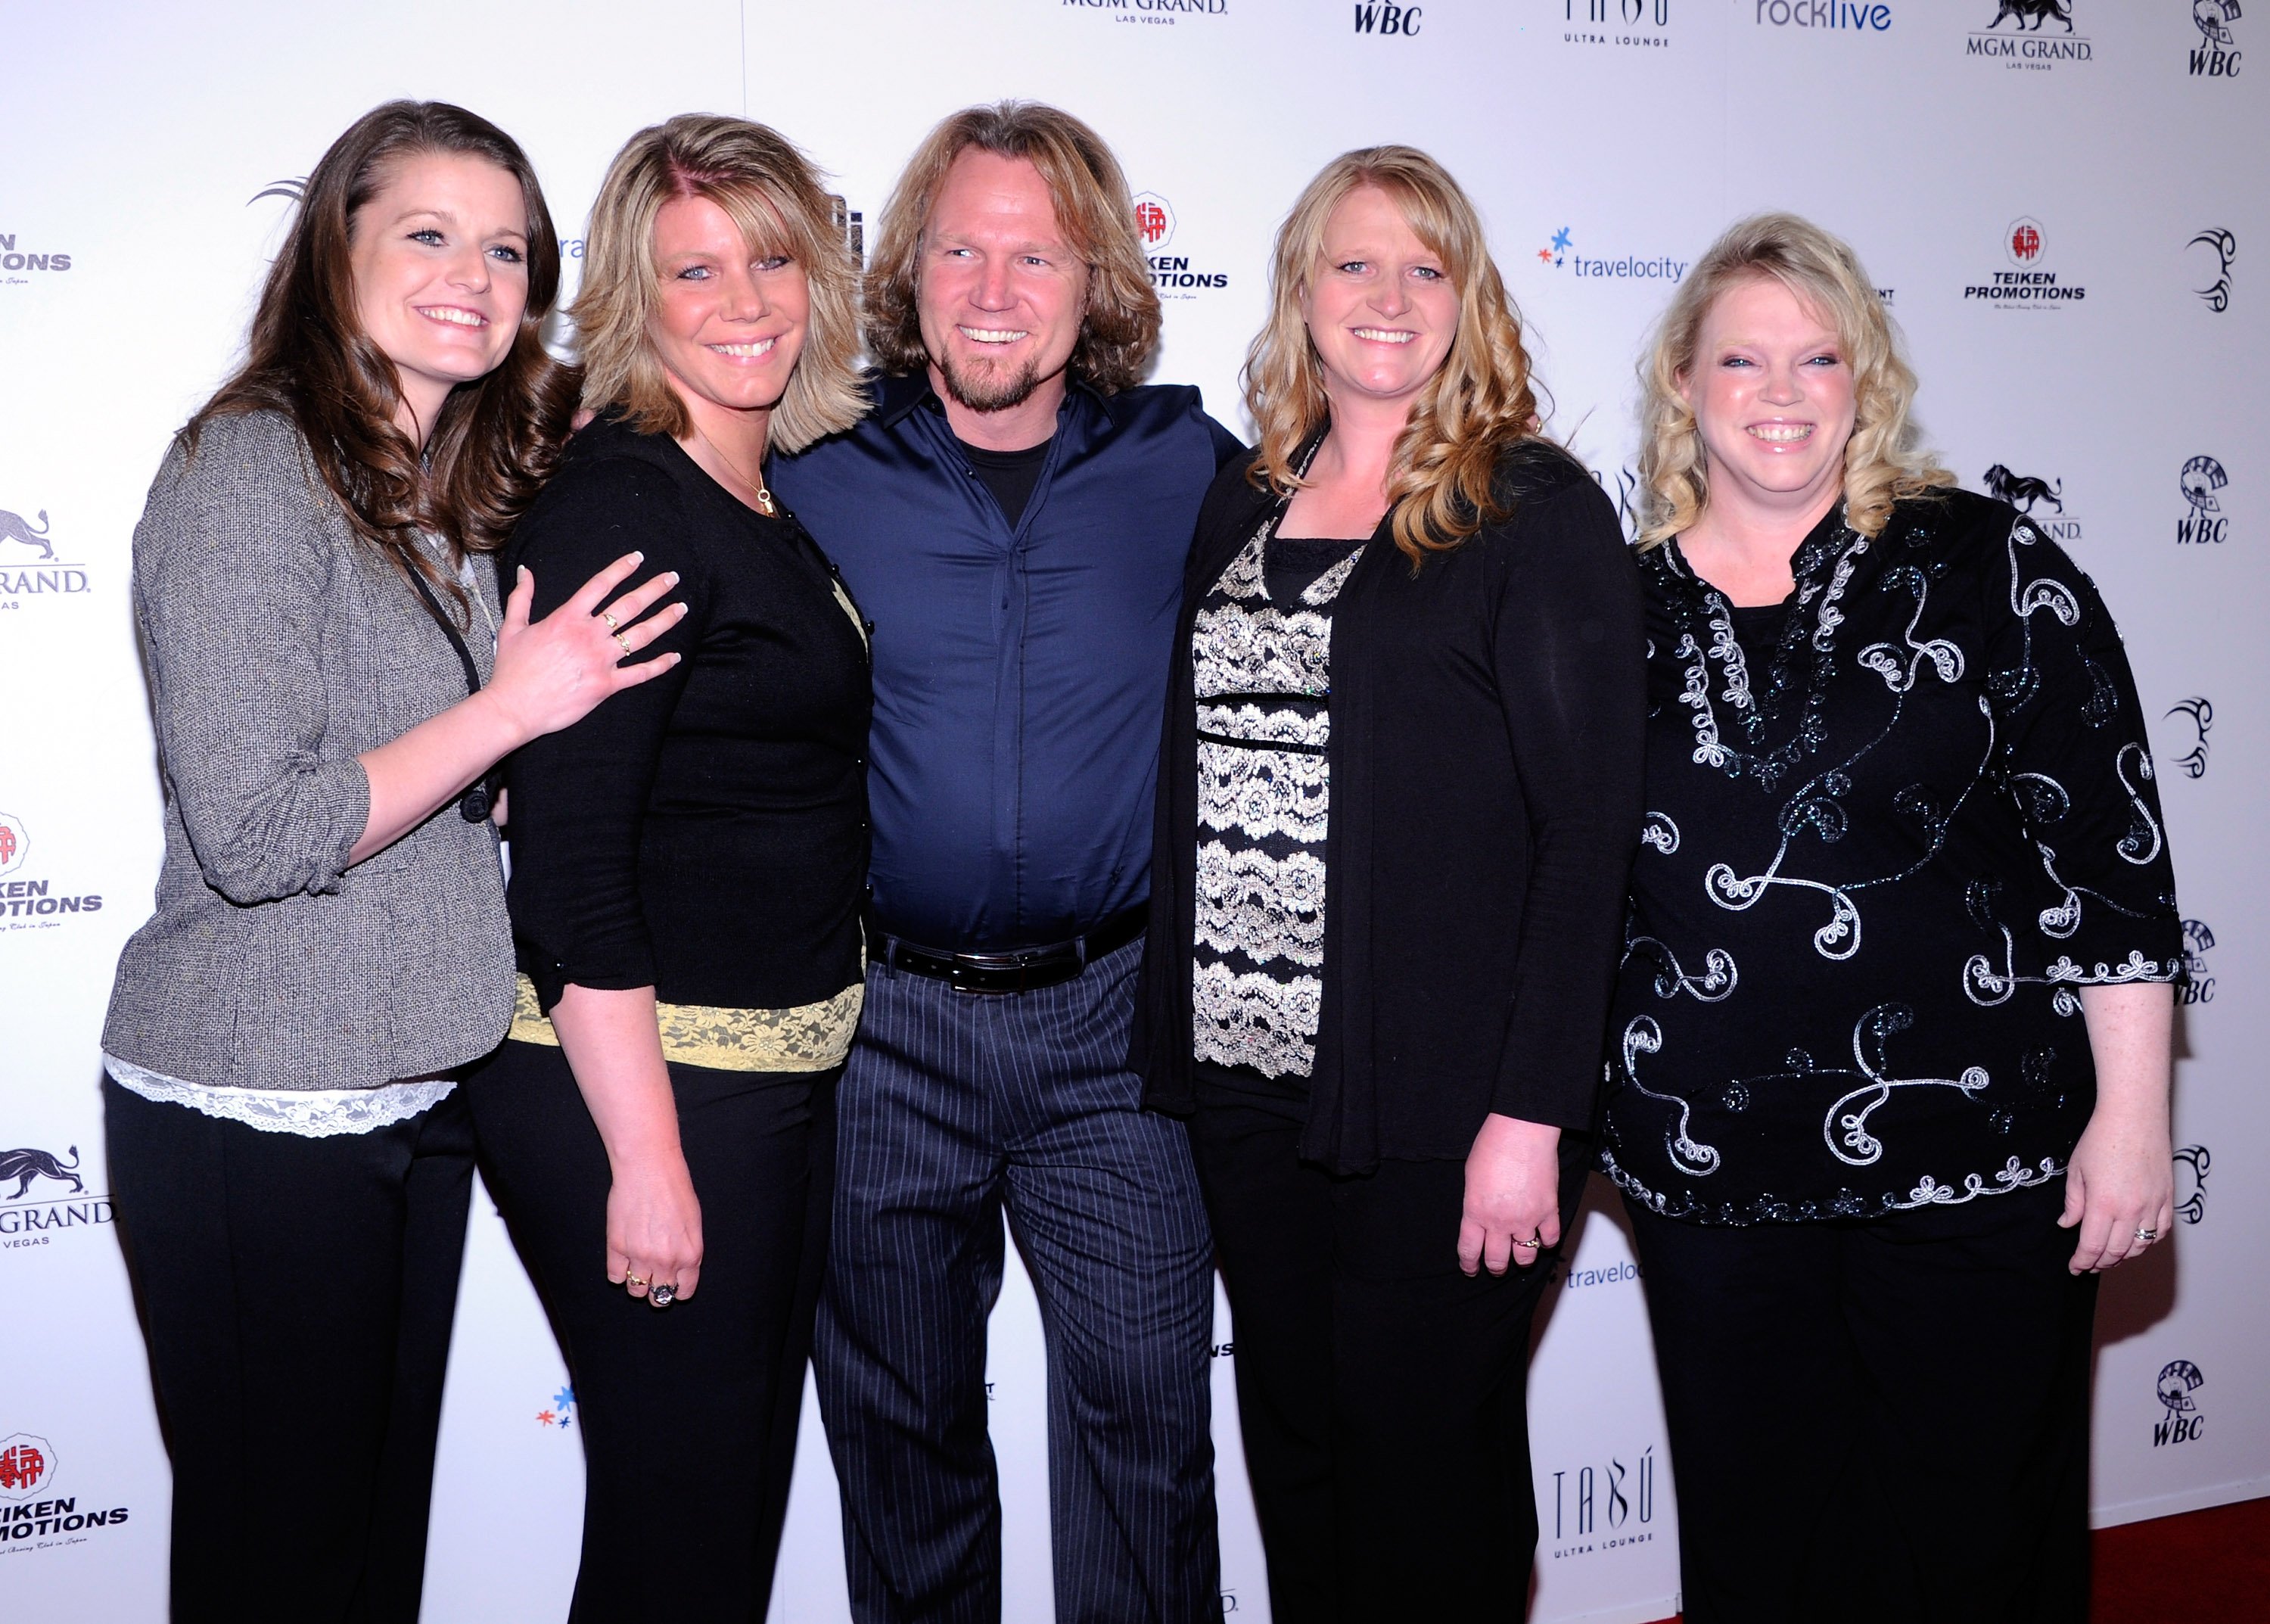 Robyn, Meri, Kody, Christine, and Janelle Brown from "Sister Wives" at the grand opening of Mike Tyson's one-man show at the Hollywood Theatre at the MGM Grand Hotel or Casino April 14, 2012 in Las Vegas, Nevada | Photo: Getty Images